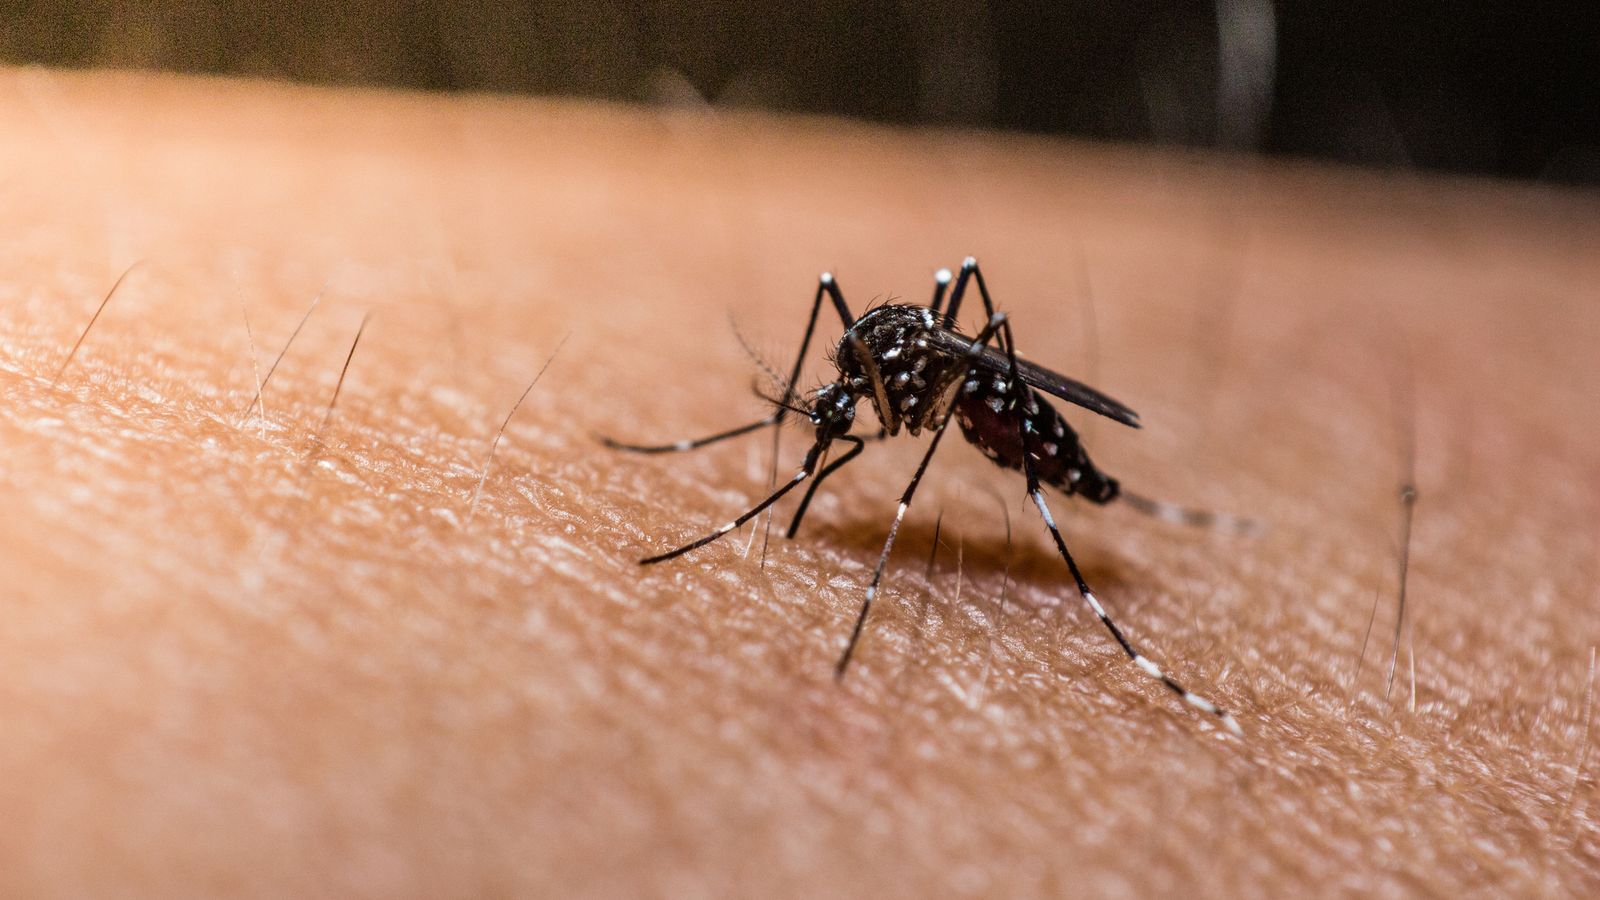 US health alert issued after malaria reported in Texas and Florida